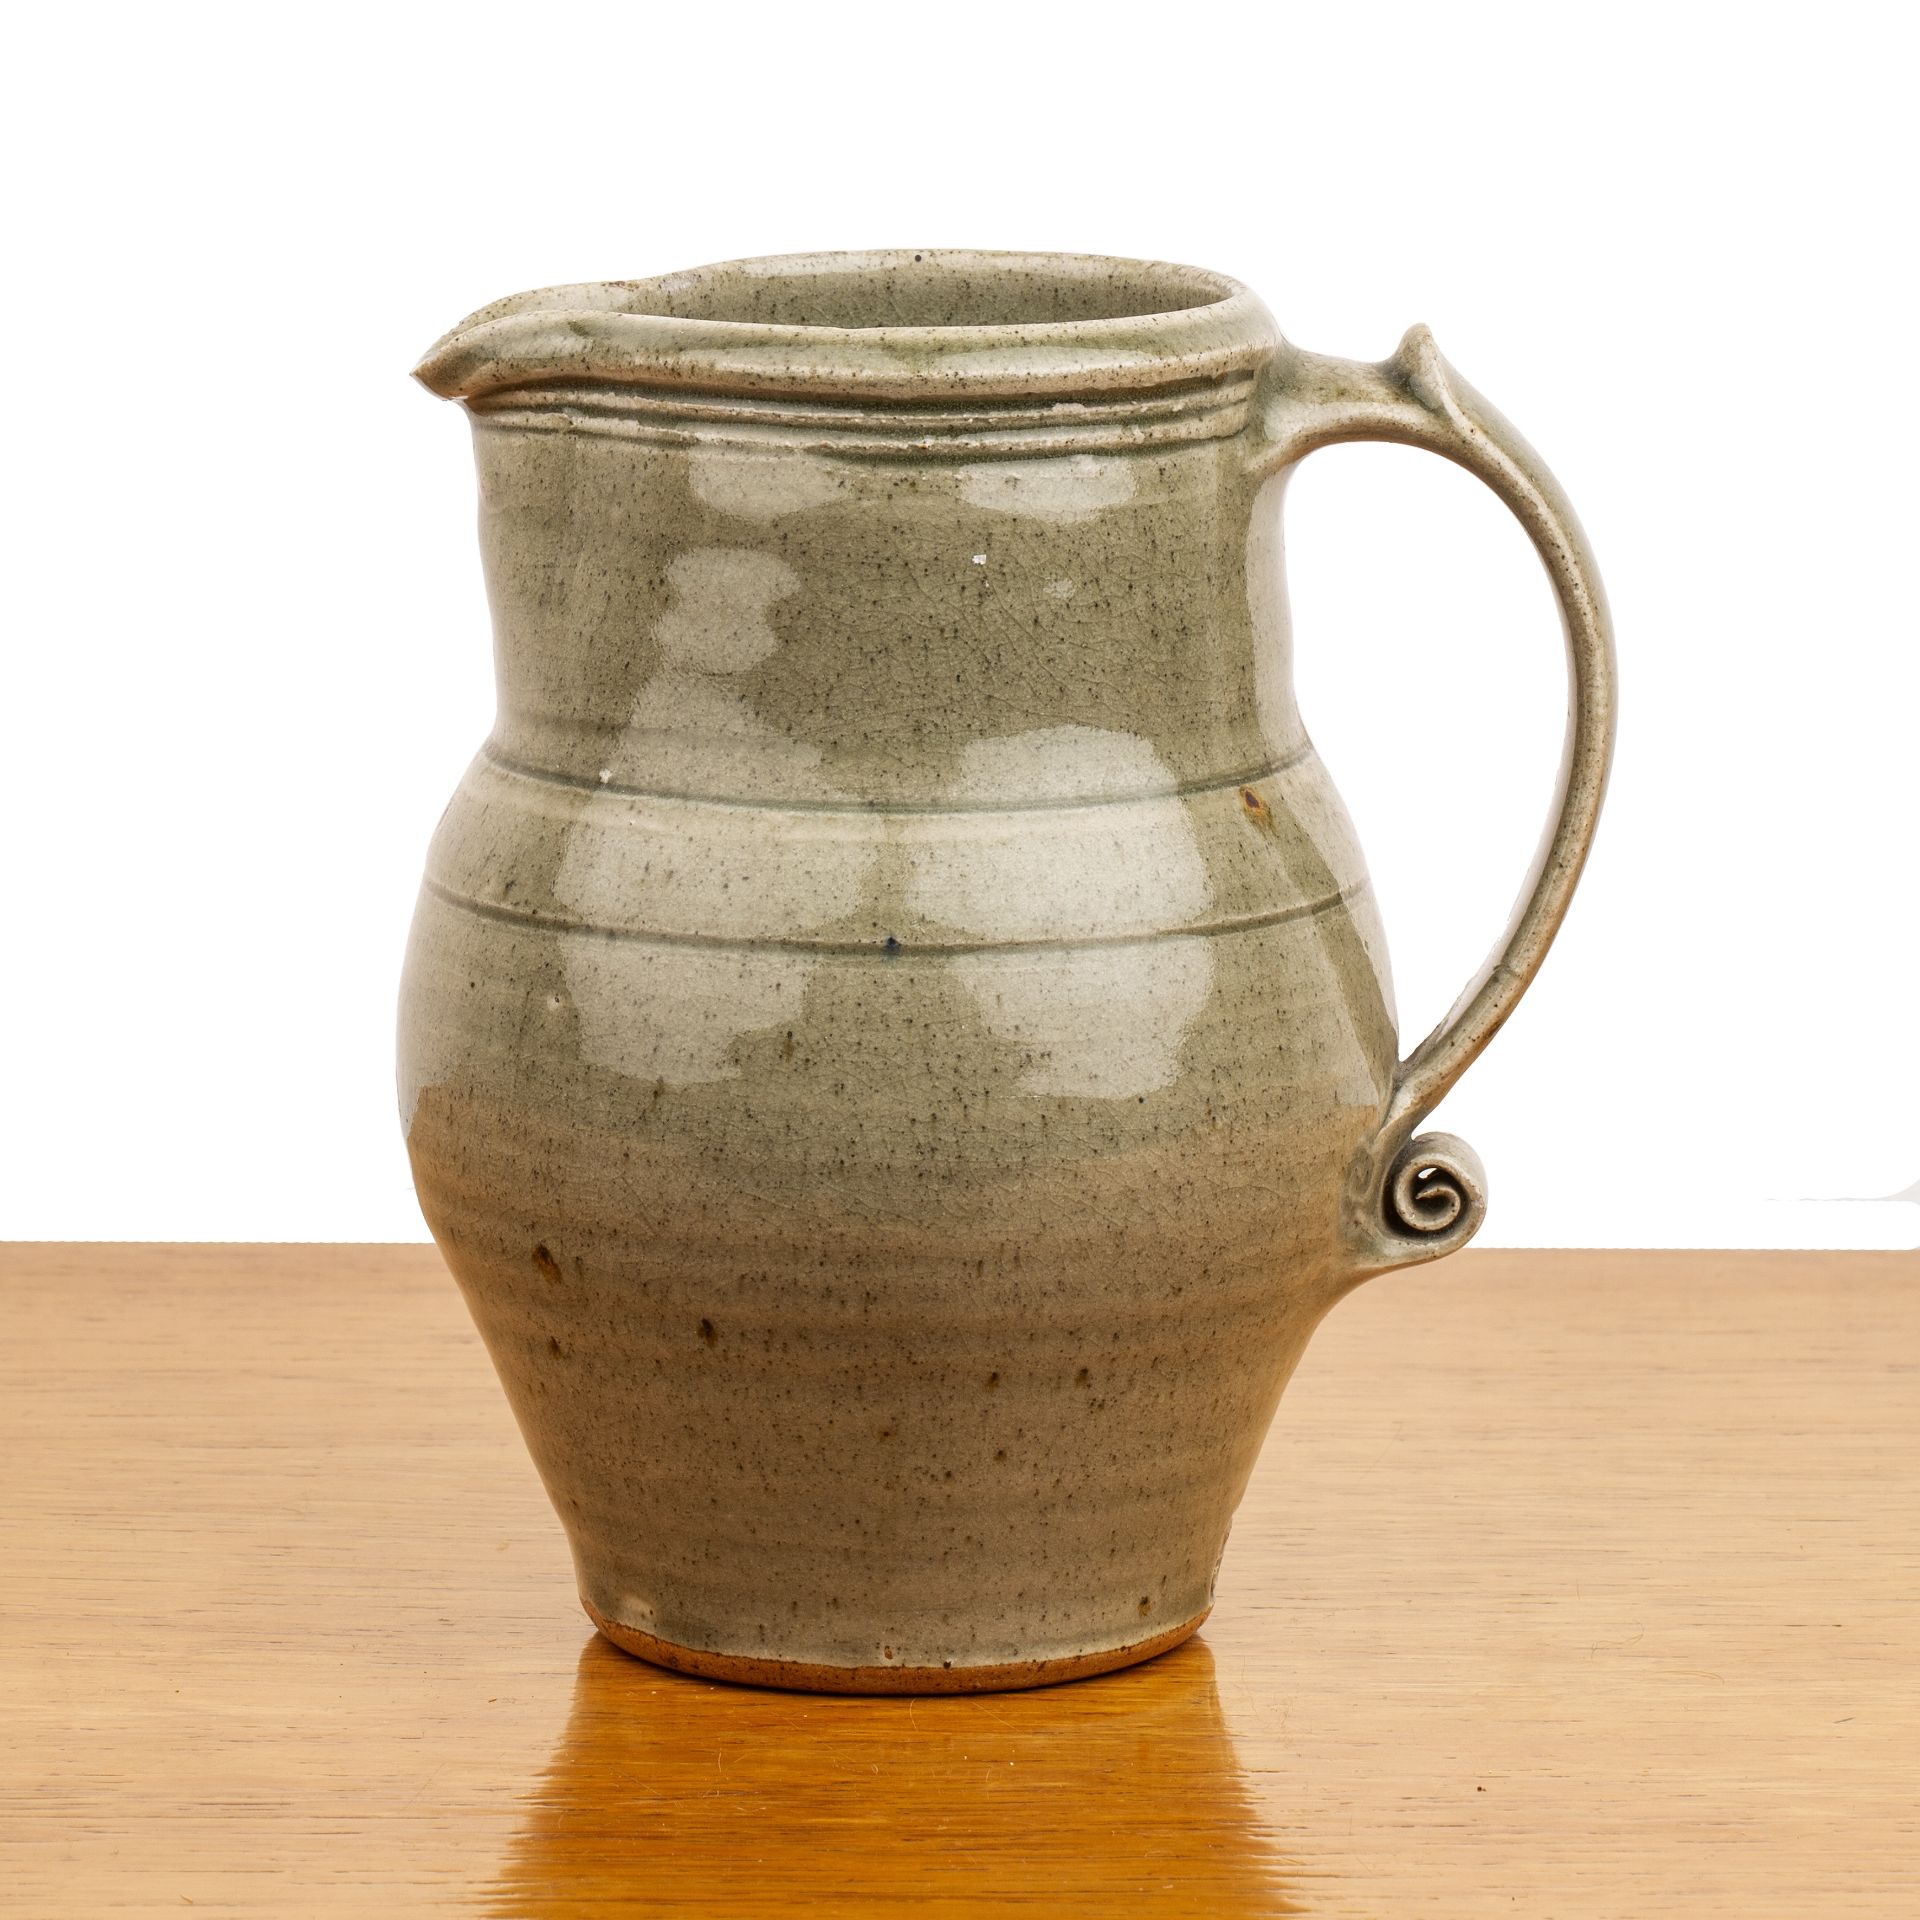 Leach pottery (St. Ives) Standard ware studio pottery jug with scrolling handle and incised banding,